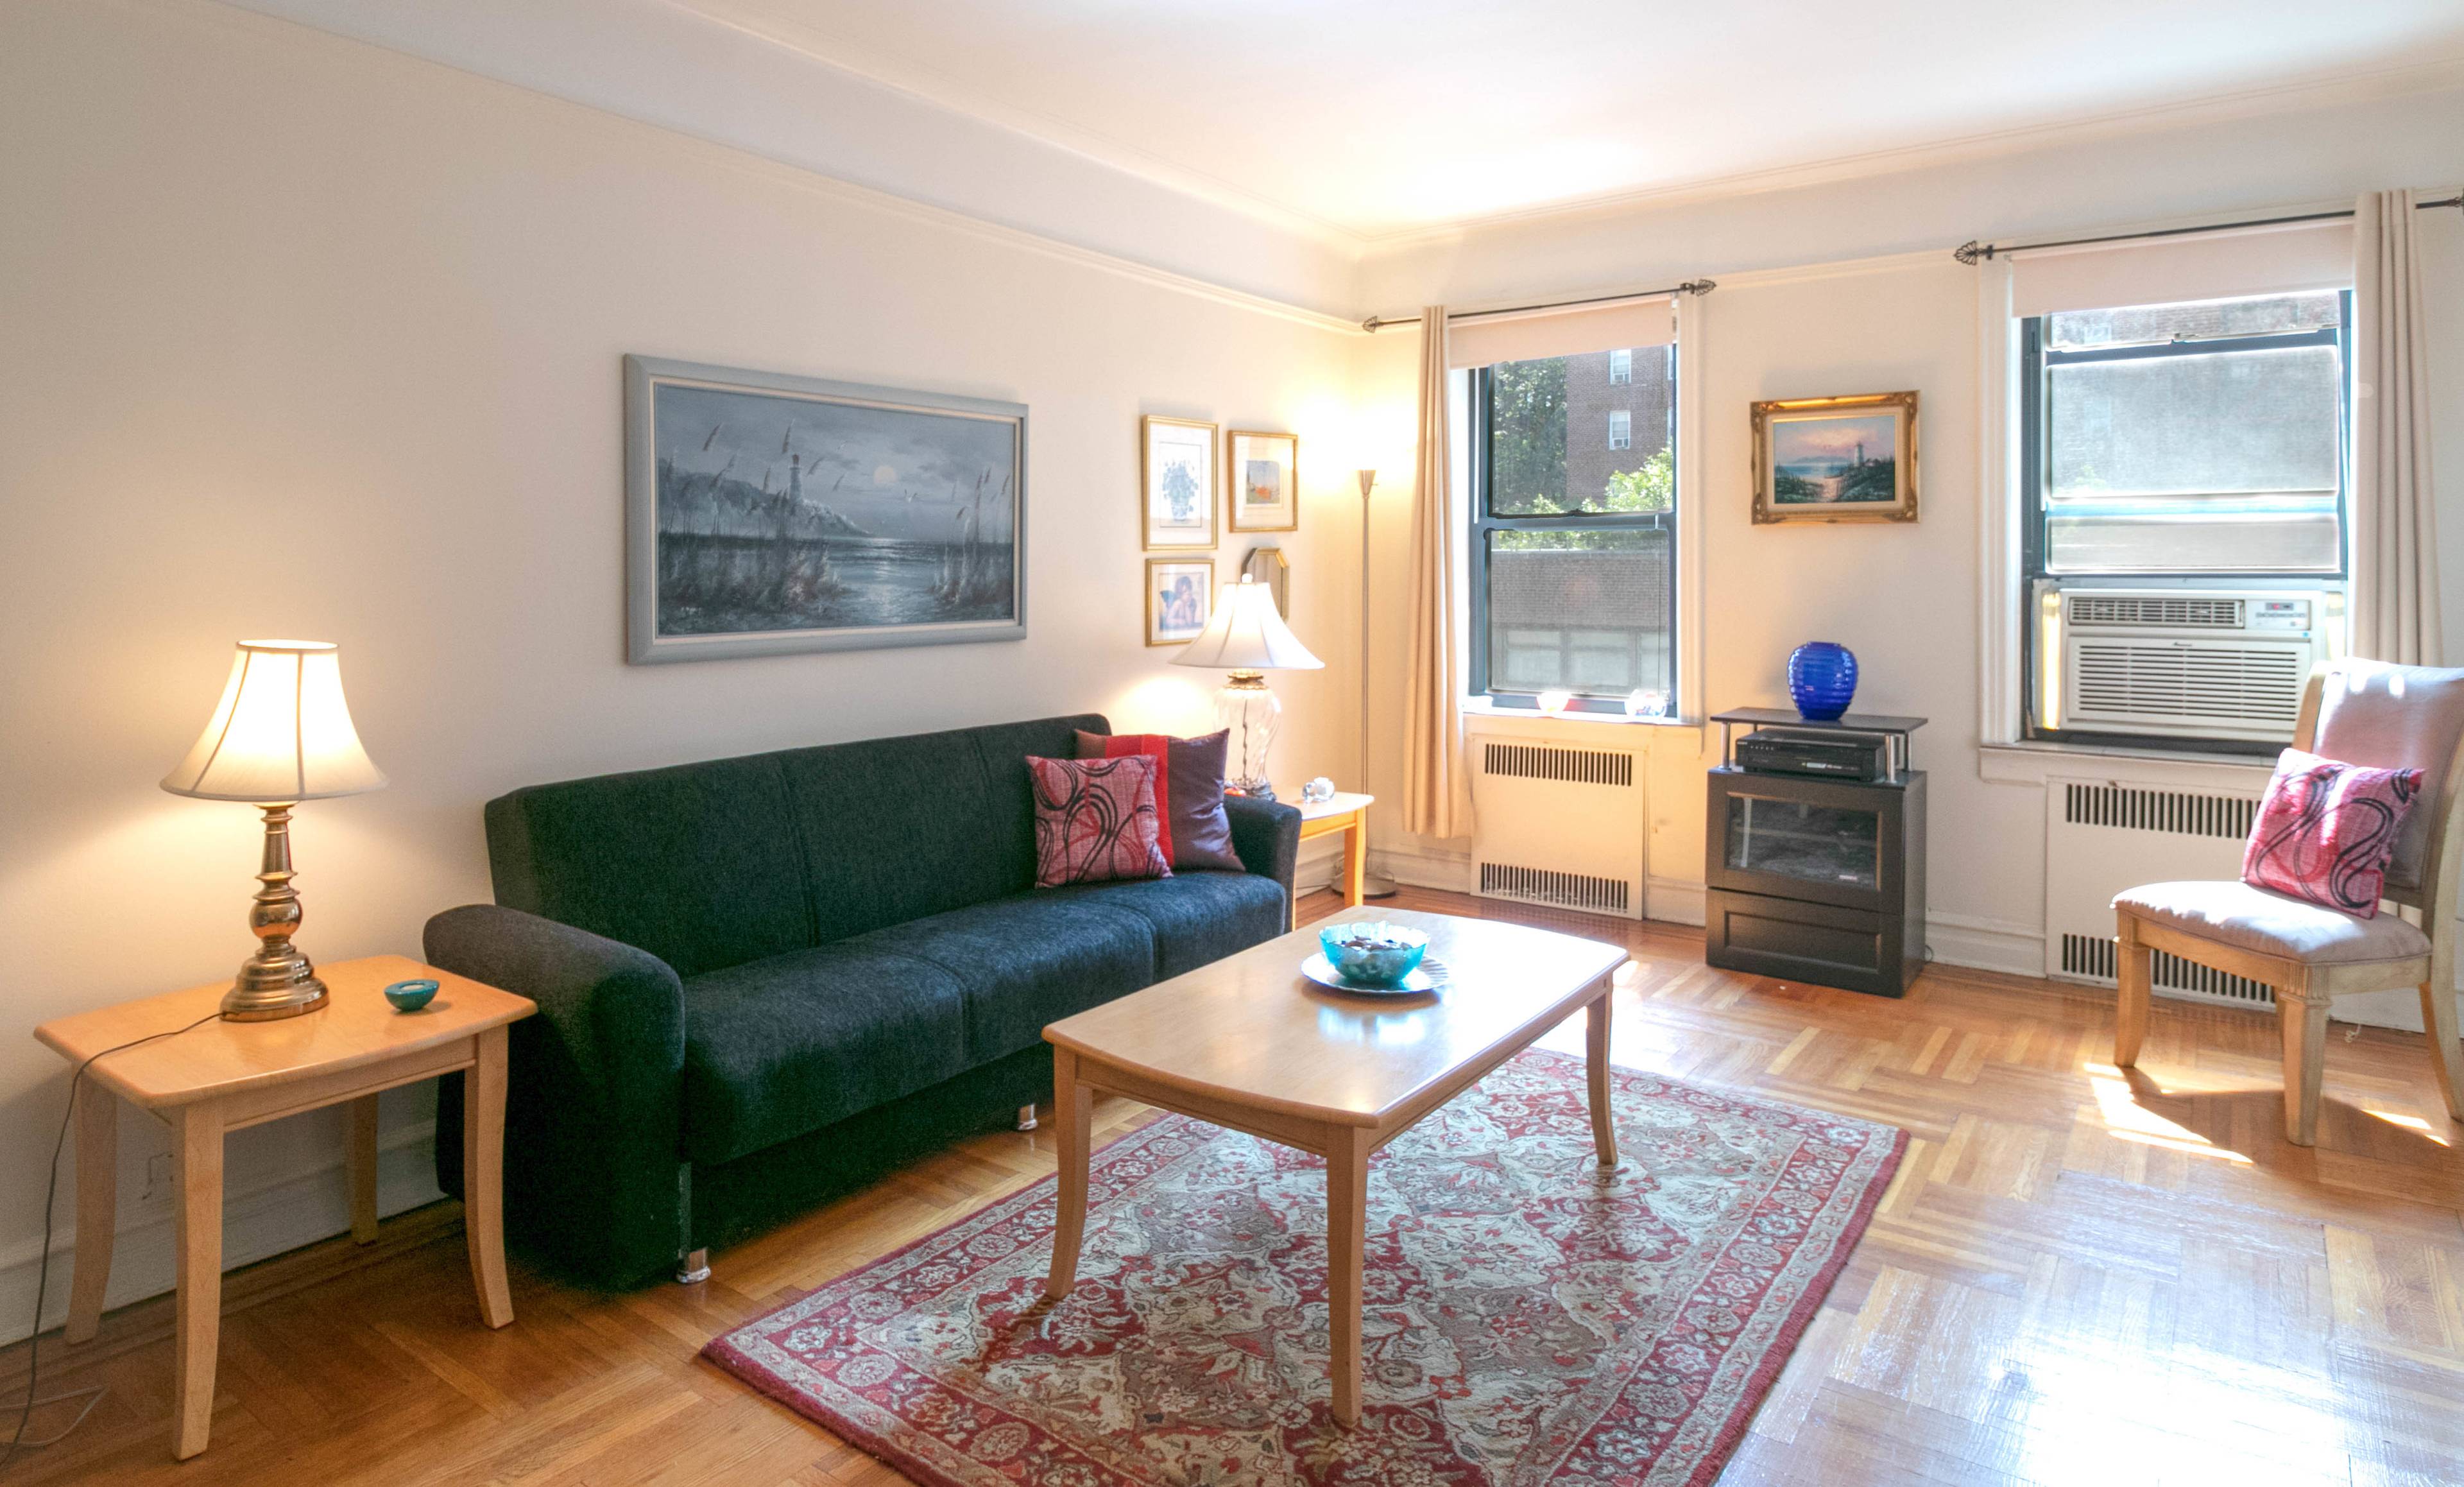 Spectacular Prewar 1 bedroom home in sought after Stephen Hall cooperative in the heart of Jackson Heights Historic District.